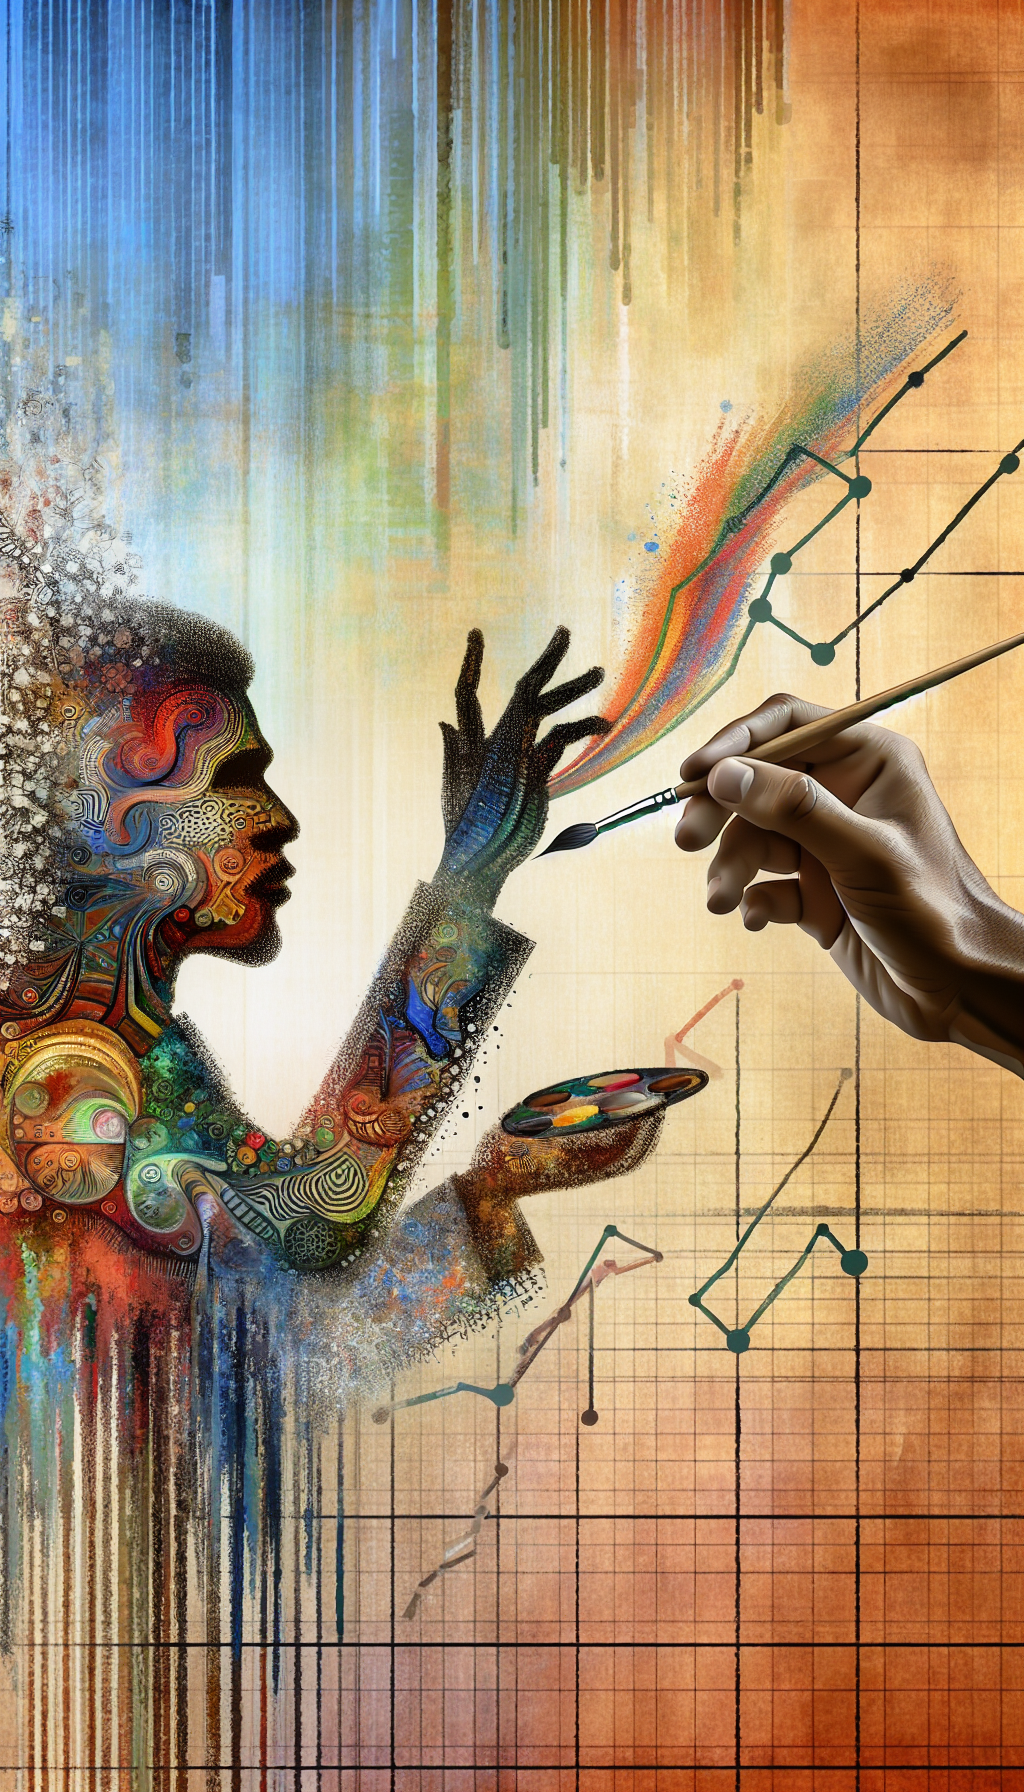 An illustration features an artist's hand, with a morphing paintbrush, dynamically painting a silhouette of Charles Bibbs’s face. Each stroke reveals iconic motifs from his artwork, arranged in a collage that forms his signature patterns and vibrant colors. The background subtly transitions into an ascending graph, symbolizing the increasing value of Bibbs's art in the market.